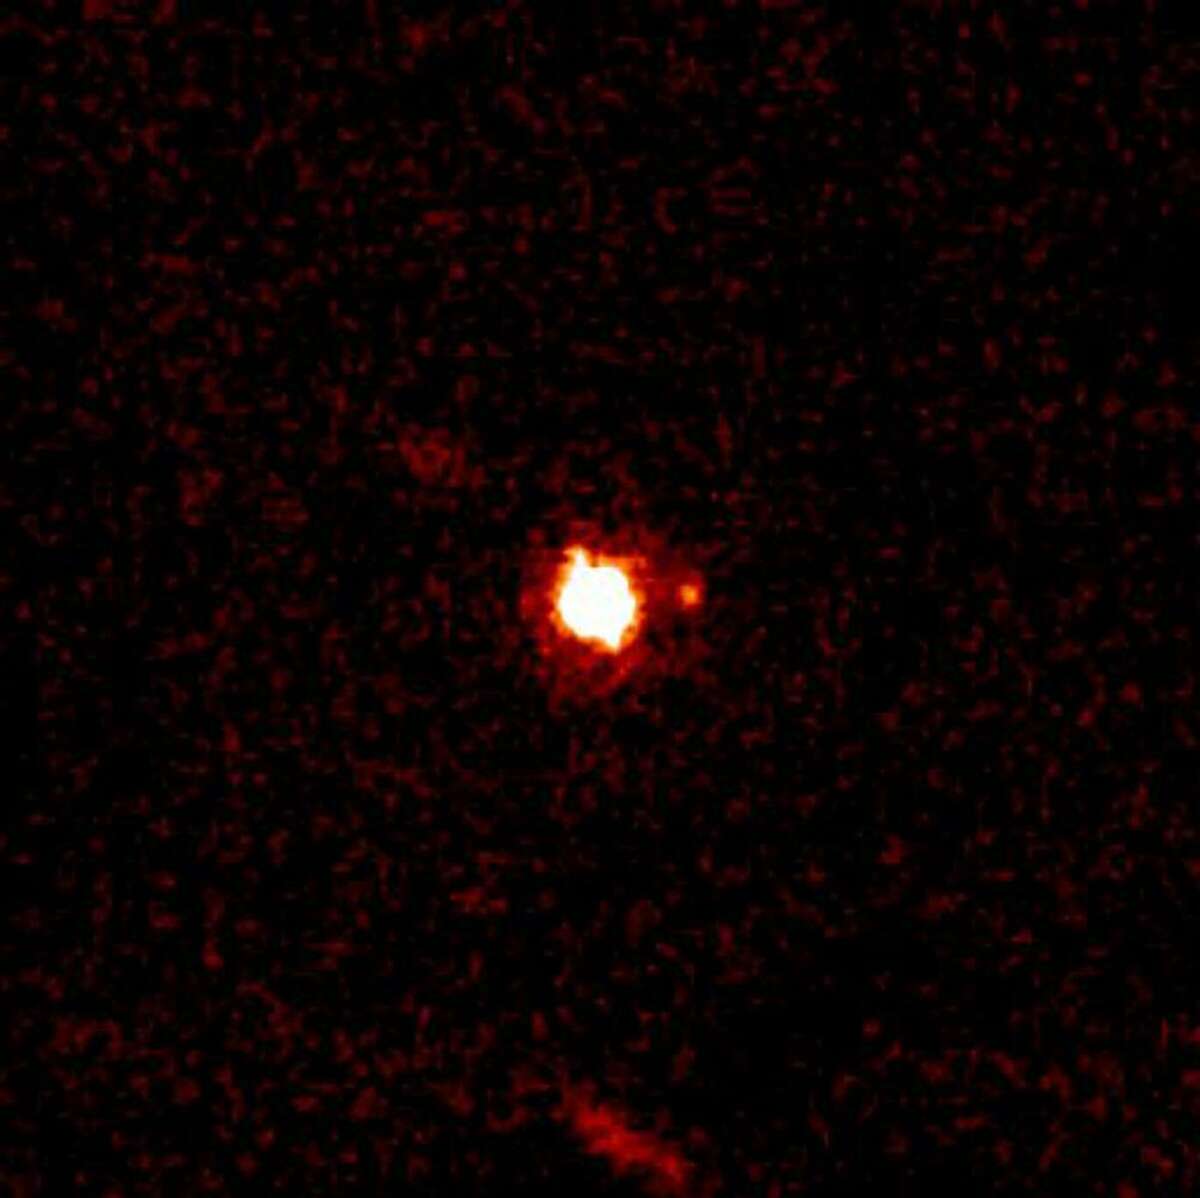 ** CORRECTS TYPE OF CELESTIAL BODY ** In this photo provided by the W.M. Keck Observatory in Kamuela, Hawaii, the Kuiper Belt object 2003 UB313 (nicknamed "Xena") received an official name Wednesday, Sept. 13, 2006, as Eris, named after the Greek goddess of chaos and strife and its satellite, Gabrielle, also received a formal name Dysnomia are shown. The dwarf planet appears in the center, while the moon is the small dot at the 3 o'clock position. The christening of Eris, named after the Greek goddess of chaos and strife, was announced by the International Astronomical Union Wednesday. Weeks earlier, the professional astronomers' group stripped Pluto of its planethood under new controversial guidelines. (AP Photo/W.M. Keck Observatory, Michael Brown) ** NO SALES ** Ran on: 09-15-2006 Michael E. Brown, left, named the Kuiper Belt object designated 2003 UB313 (which he had nicknamed Xena), above, Eris, after the Greek goddess of chaos and strife.